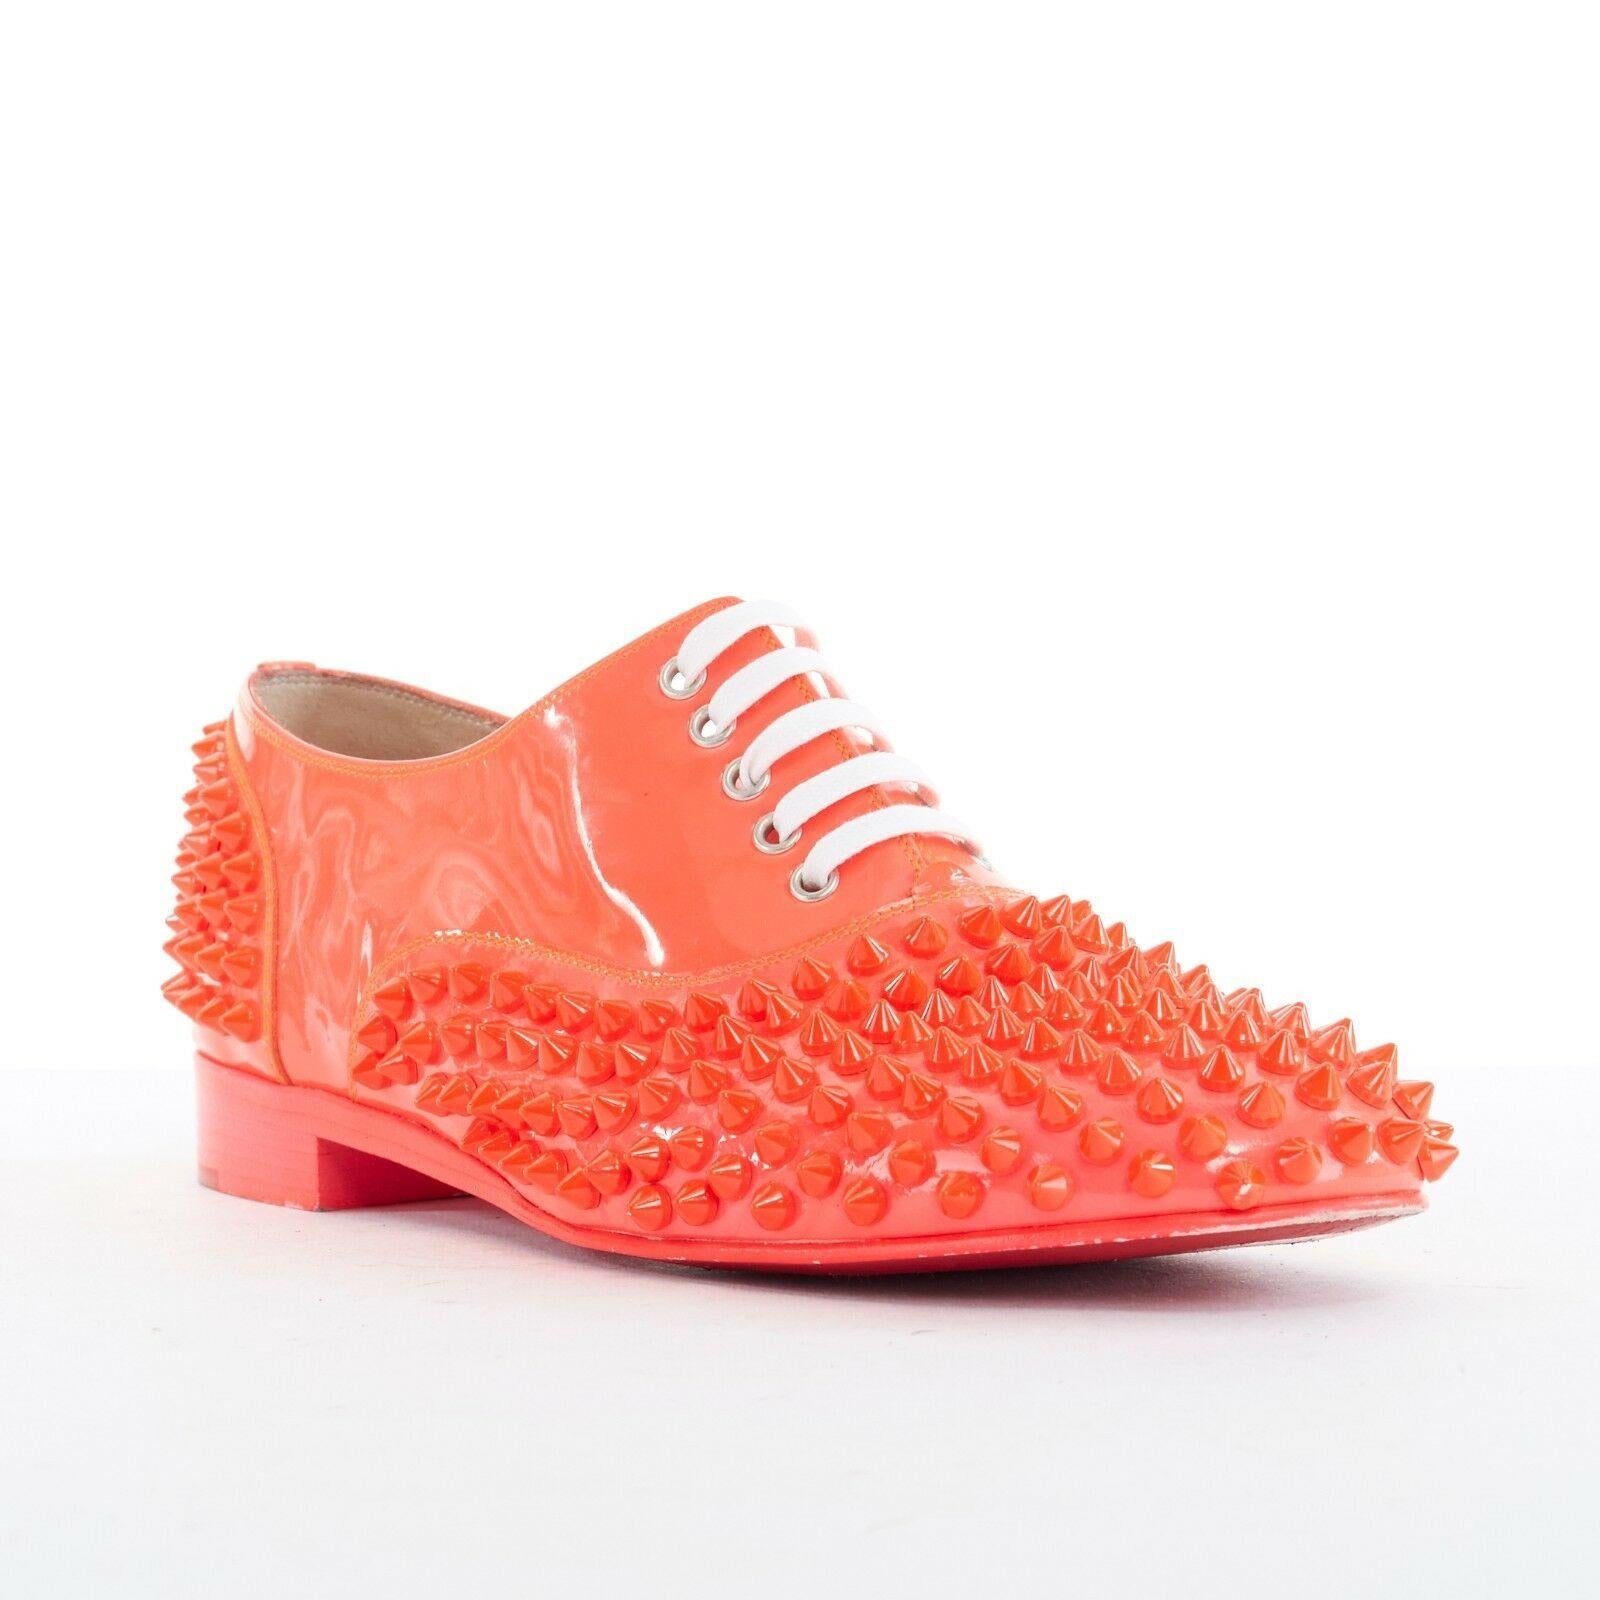 CHRISTIAN LOUBOUTIN Freddy electric pink neon spike studded laced flats EU37.5
CHRISTIAN LOUBOUTIN
Electric neon pink patent leather. Tonal spike stud embellished upper. 
Rounded toe. White flat laced front. Stacked wooden heel. 
Eletric pink